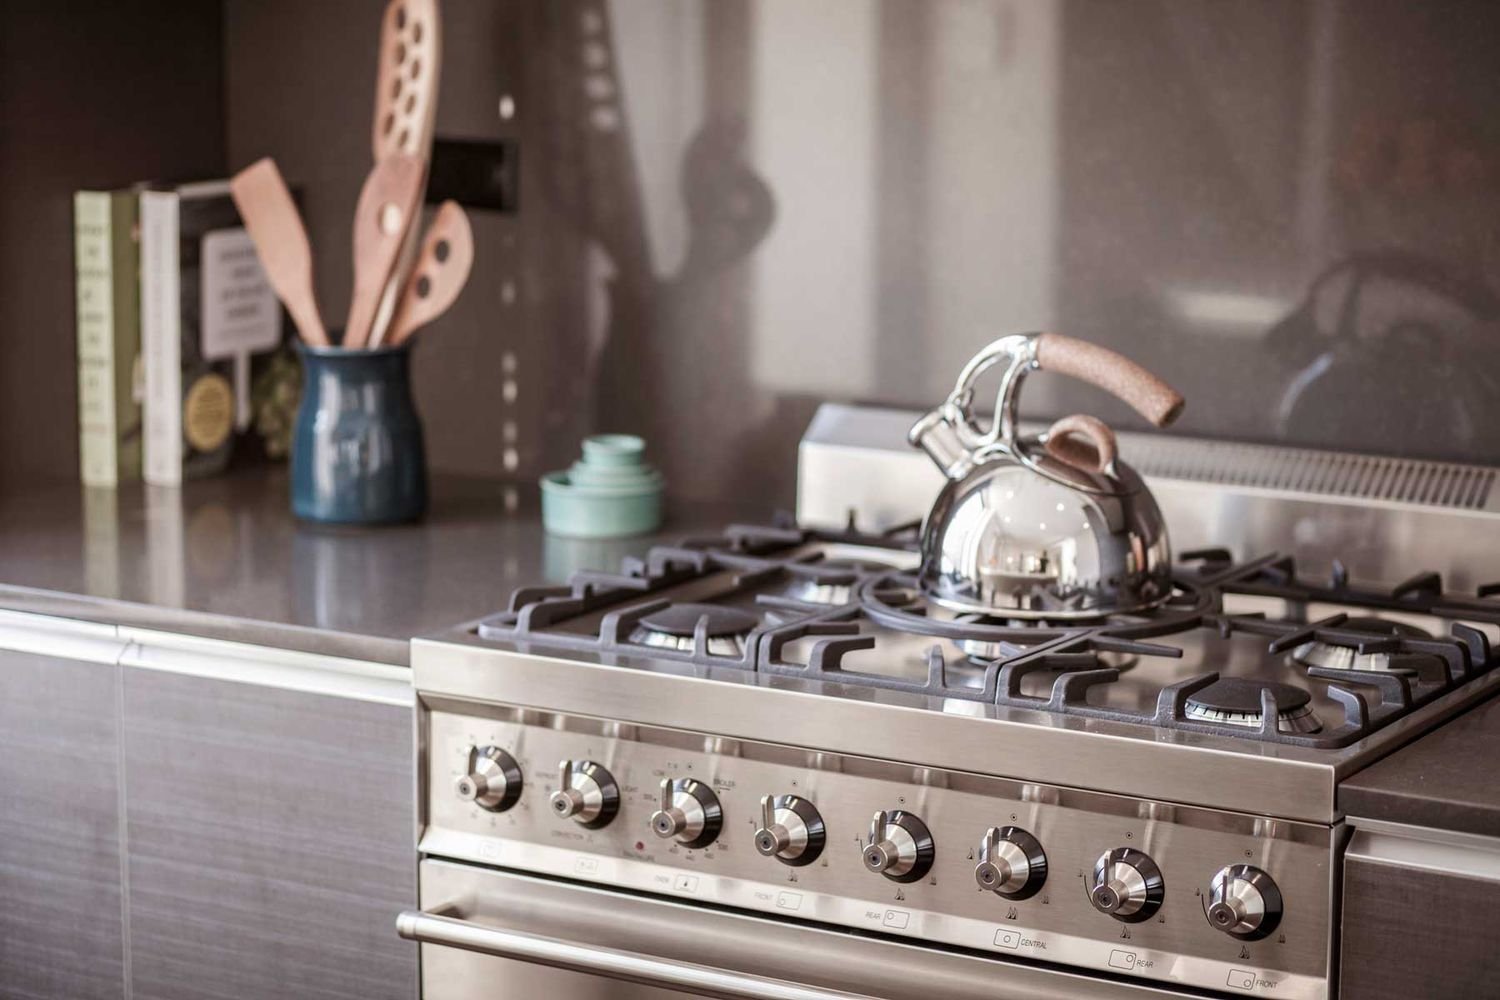 Why You Should Always Take a Photo of Your Stove Before You Go on Vacation